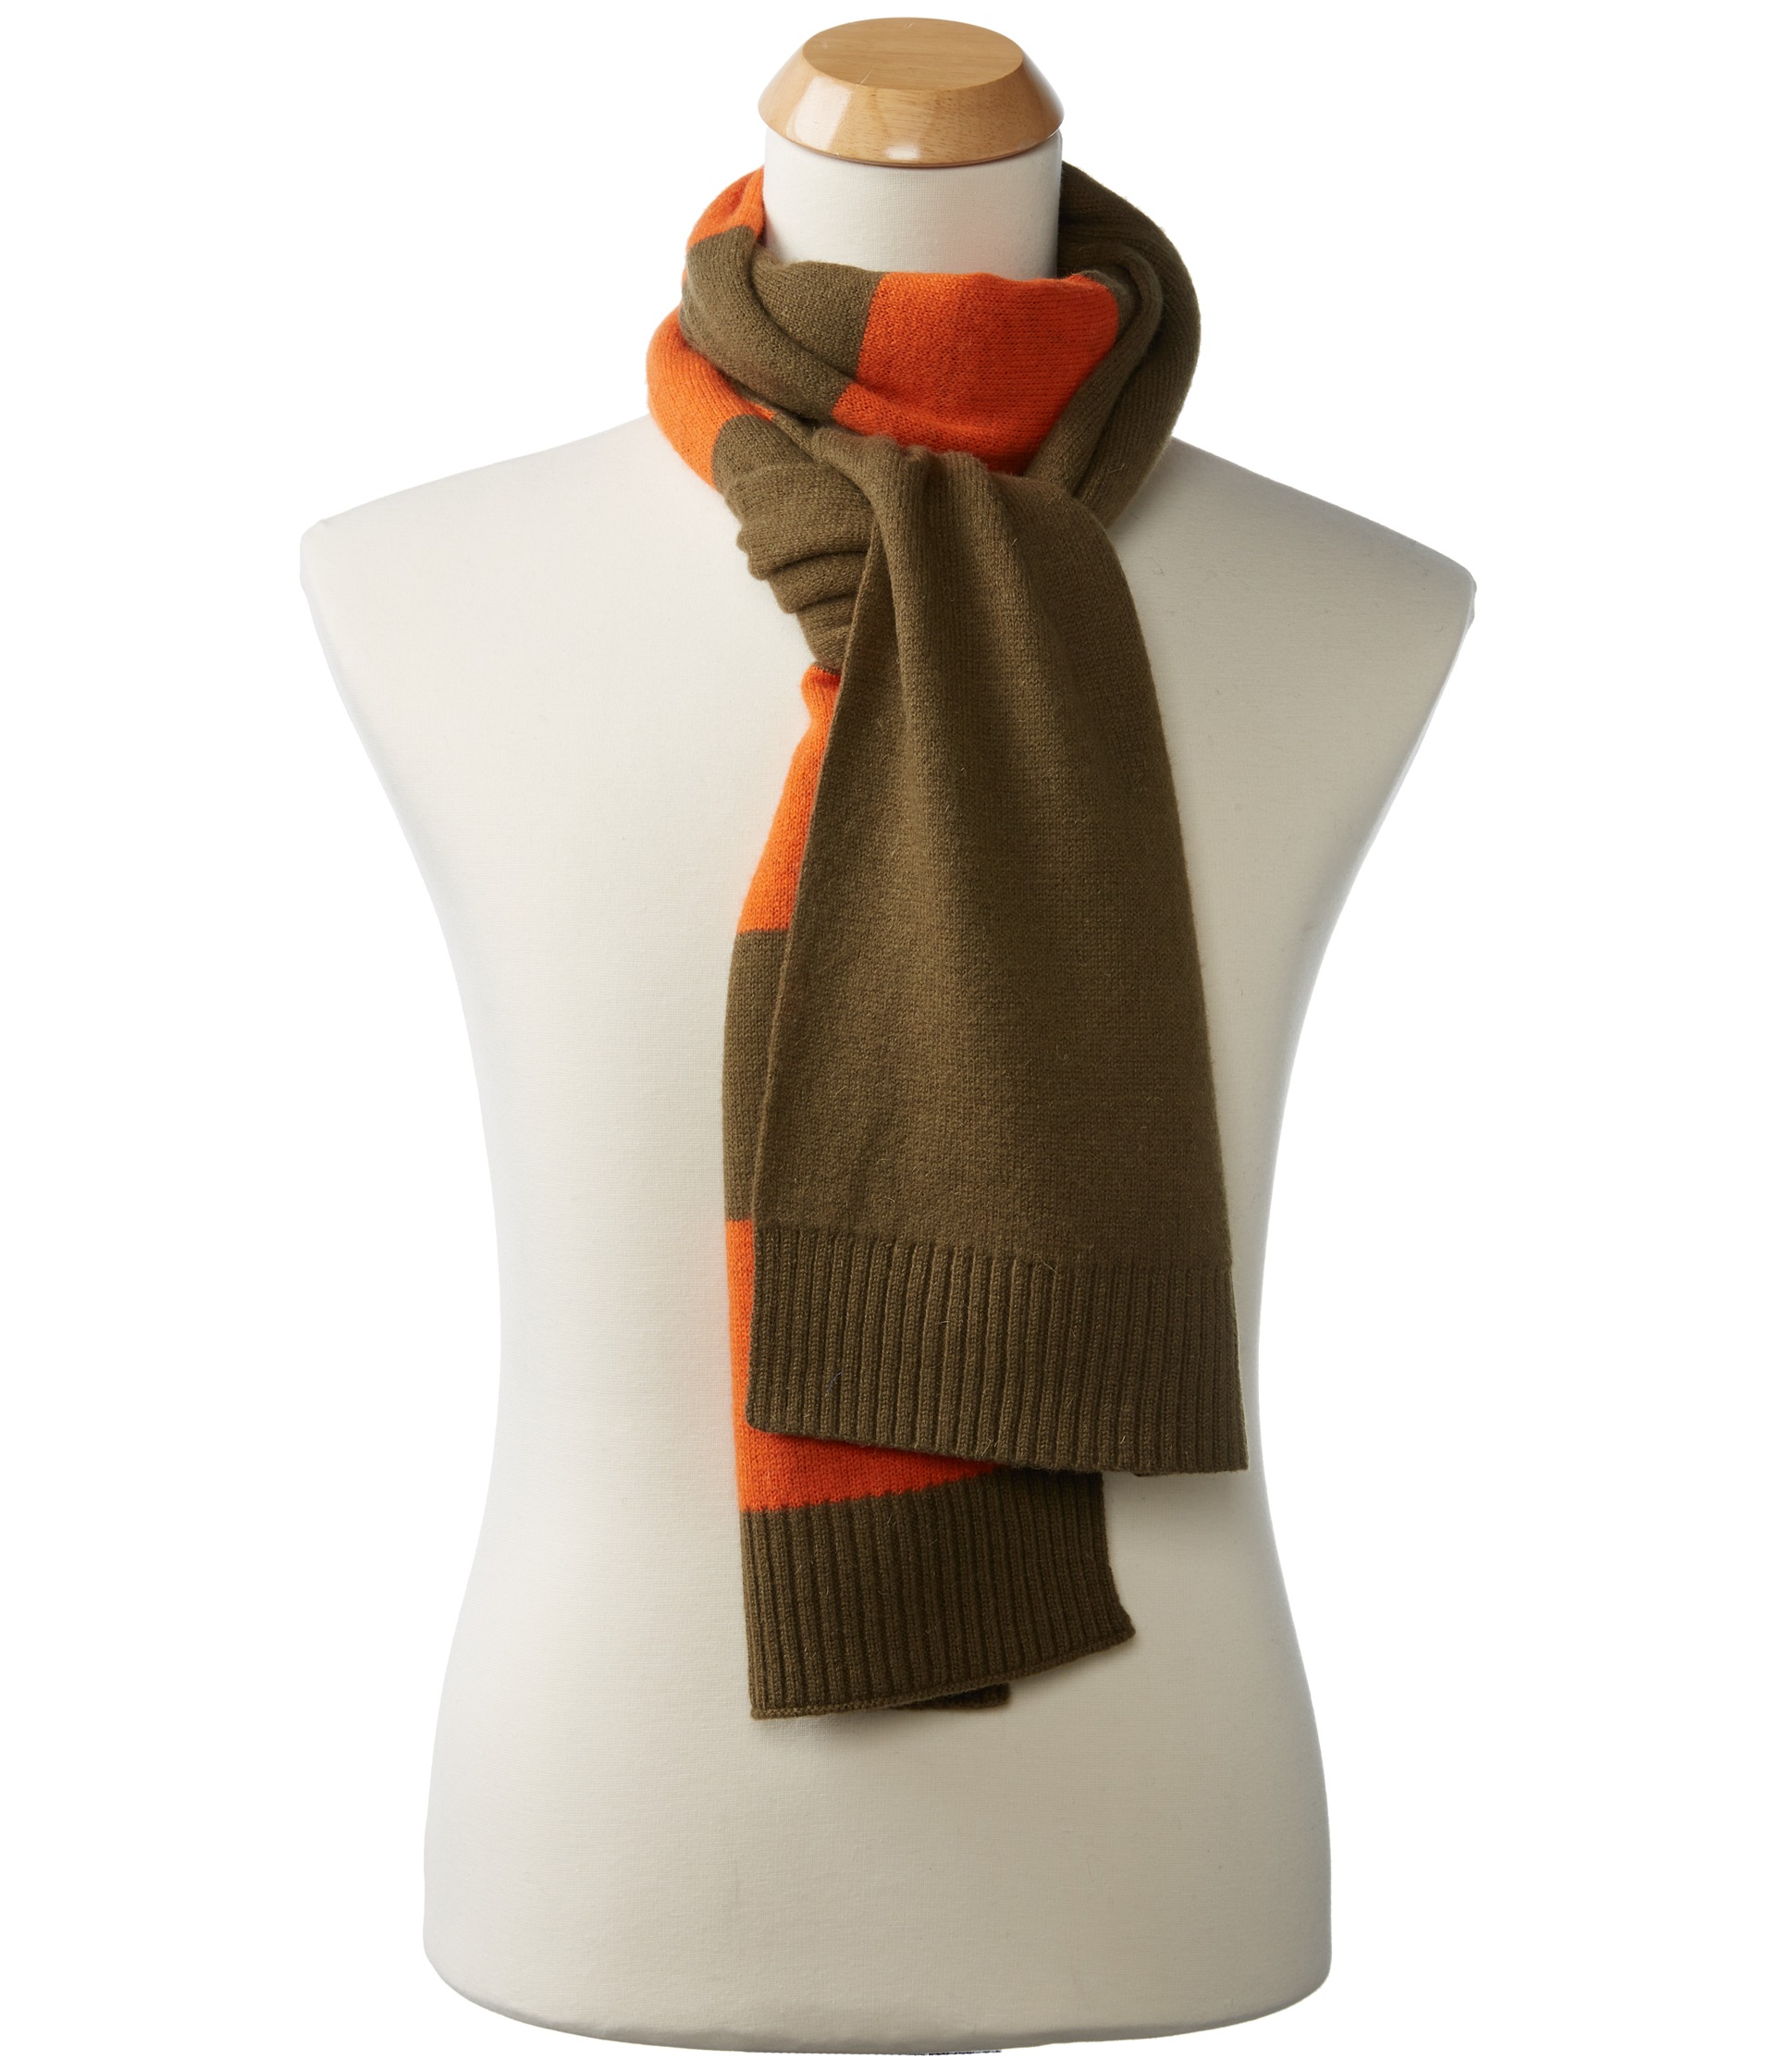 Michael Michael Kors Striped Scarf | Shipped Free at Zappos